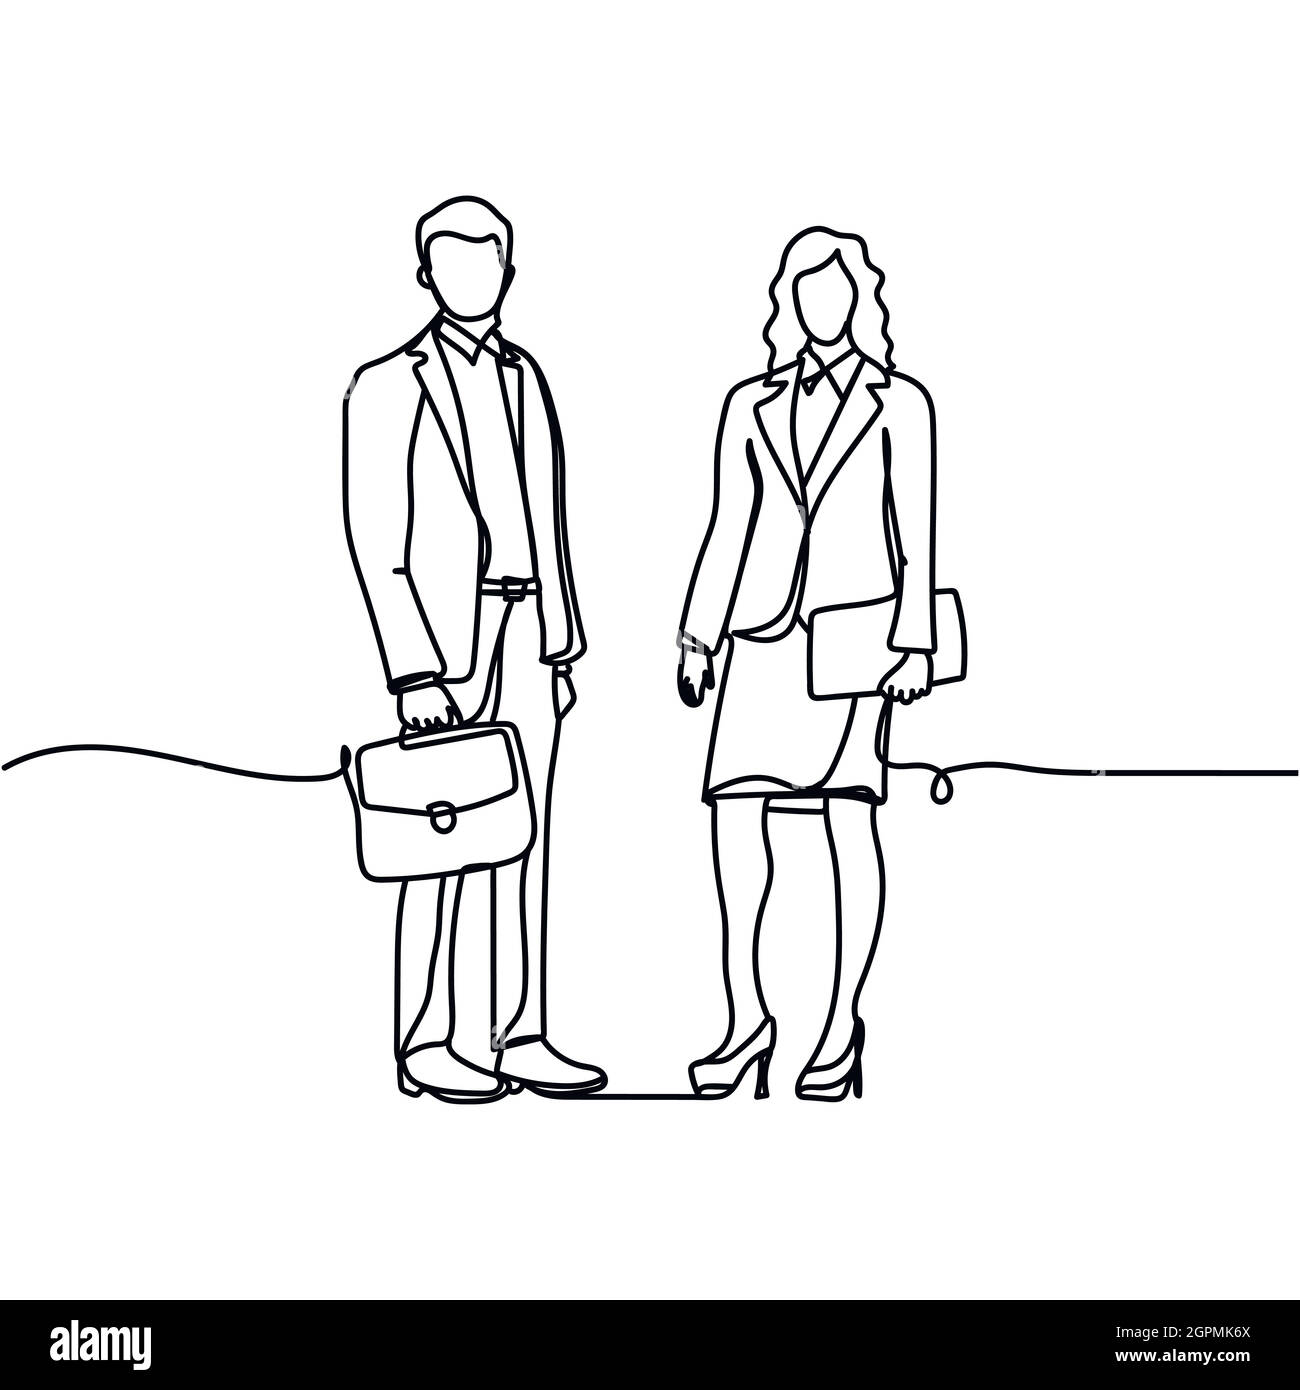 Continuous one line of businesswoman and businessman in silhouette. Minimal style. Perfect for cards, party invitations, posters, stickers, clothing. Black abstract icon. Business concept Stock Vector